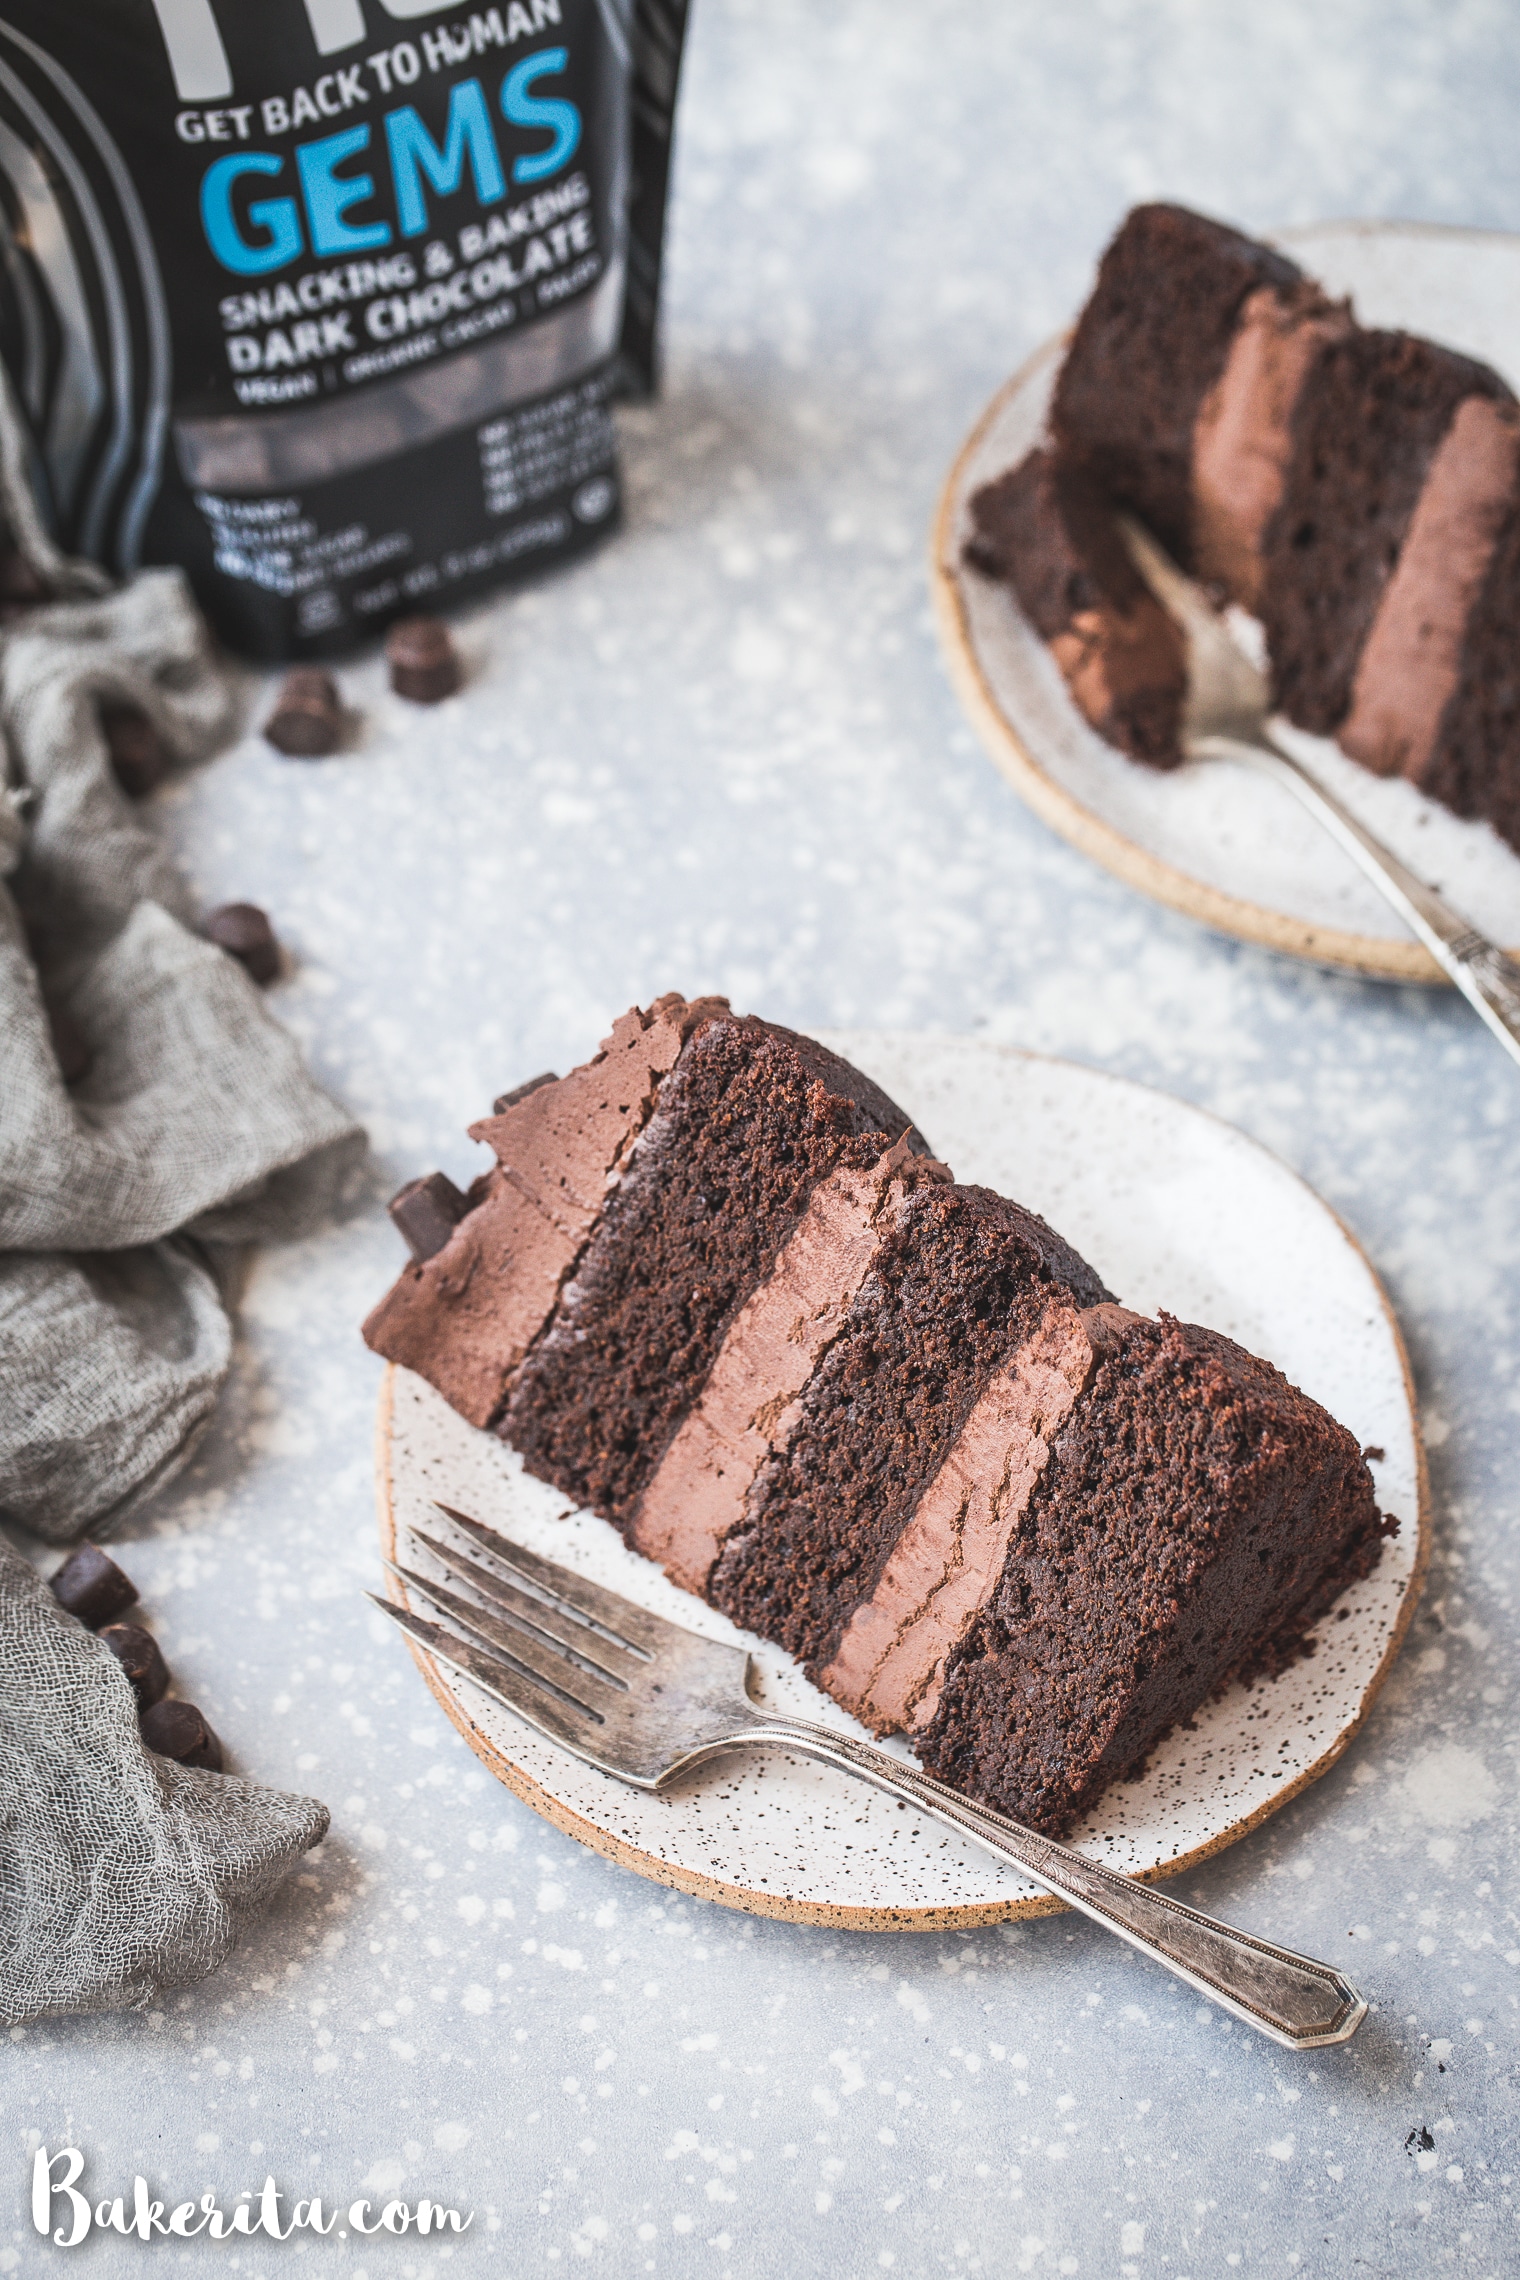 Paleo Chocolate Cake with Vegan Chocolate Ganache Frosting - a quick and easy cake recipe with a simple 2-ingredient frosting! This layer cake is gluten-free, paleo, dairy-free, and vegan, and it tastes as decadent as your favorite chocolate cake.